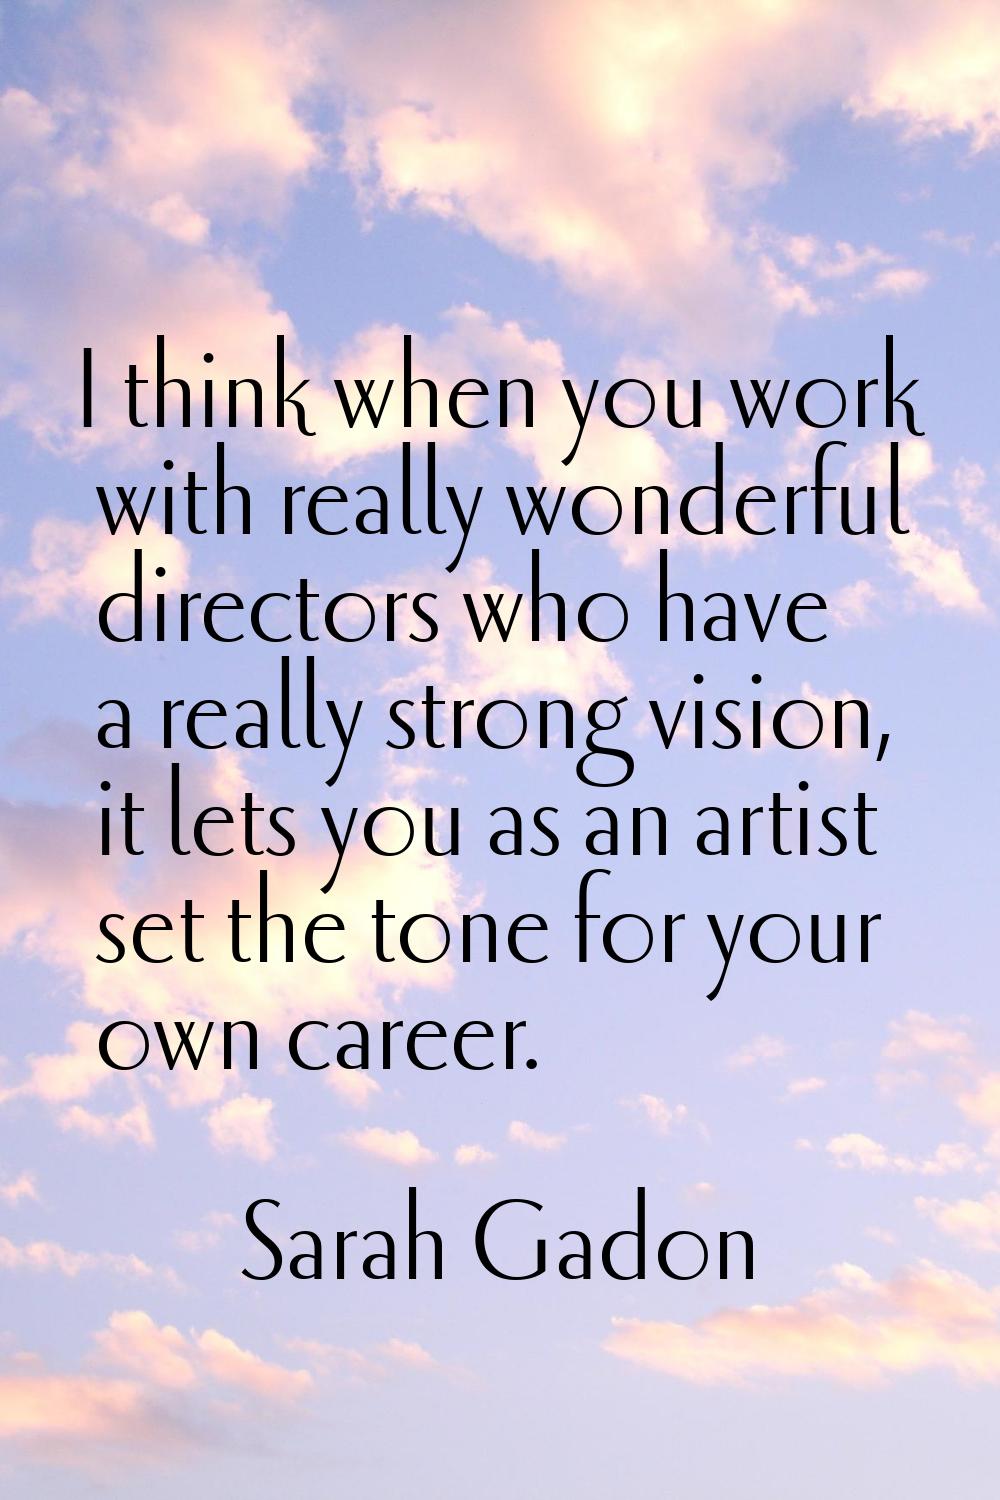 I think when you work with really wonderful directors who have a really strong vision, it lets you 